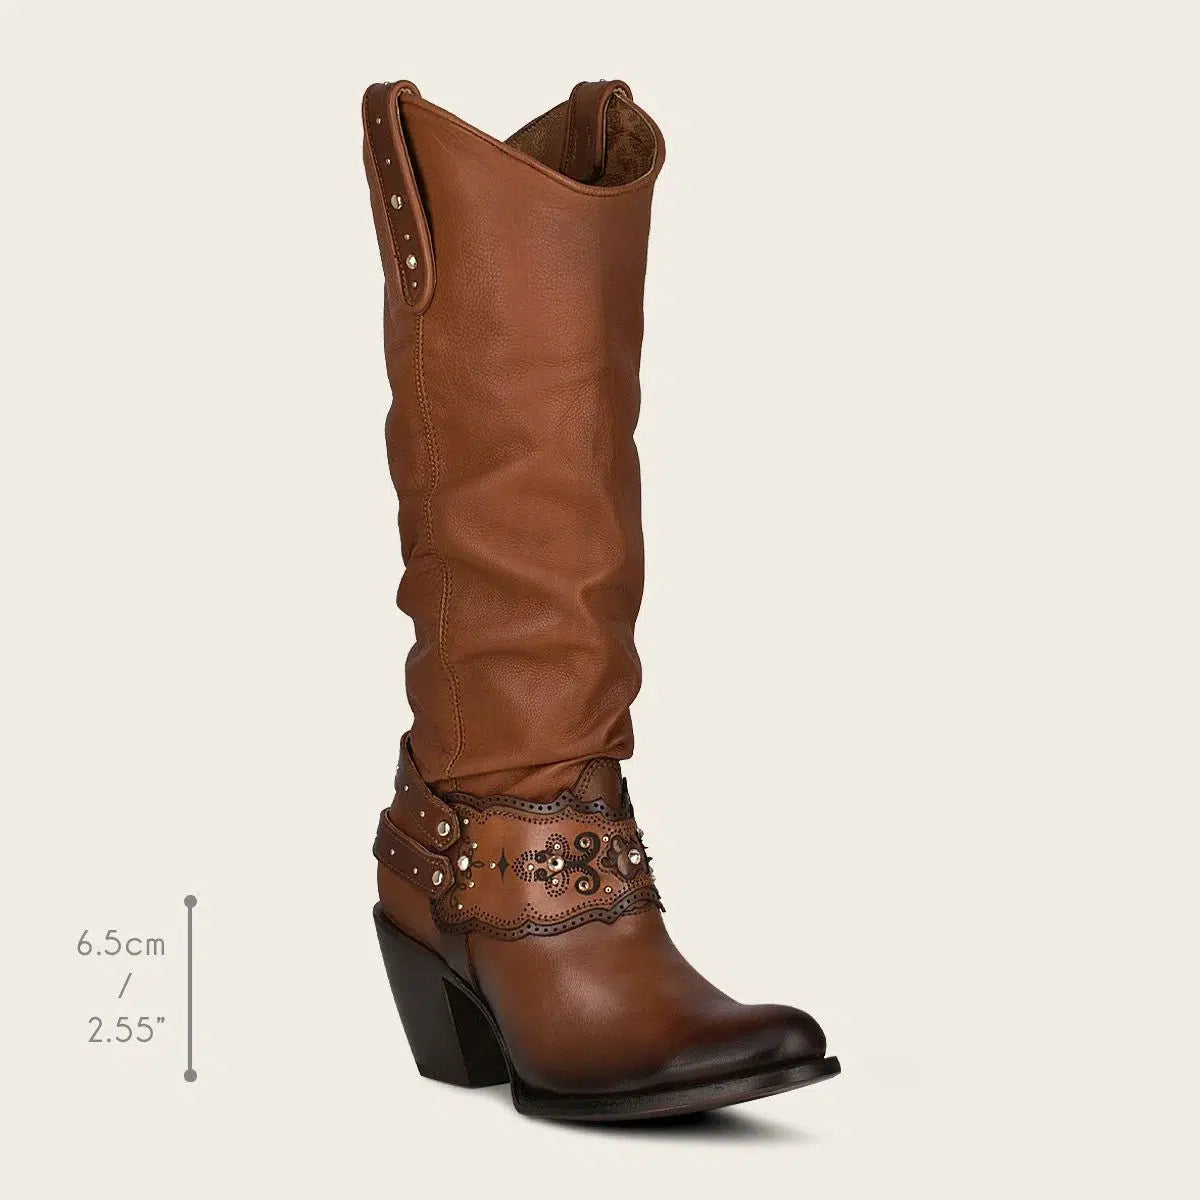 1Z41RS - Cuadra brown casual cowgirl leather knee high boots for women-Kuet.us